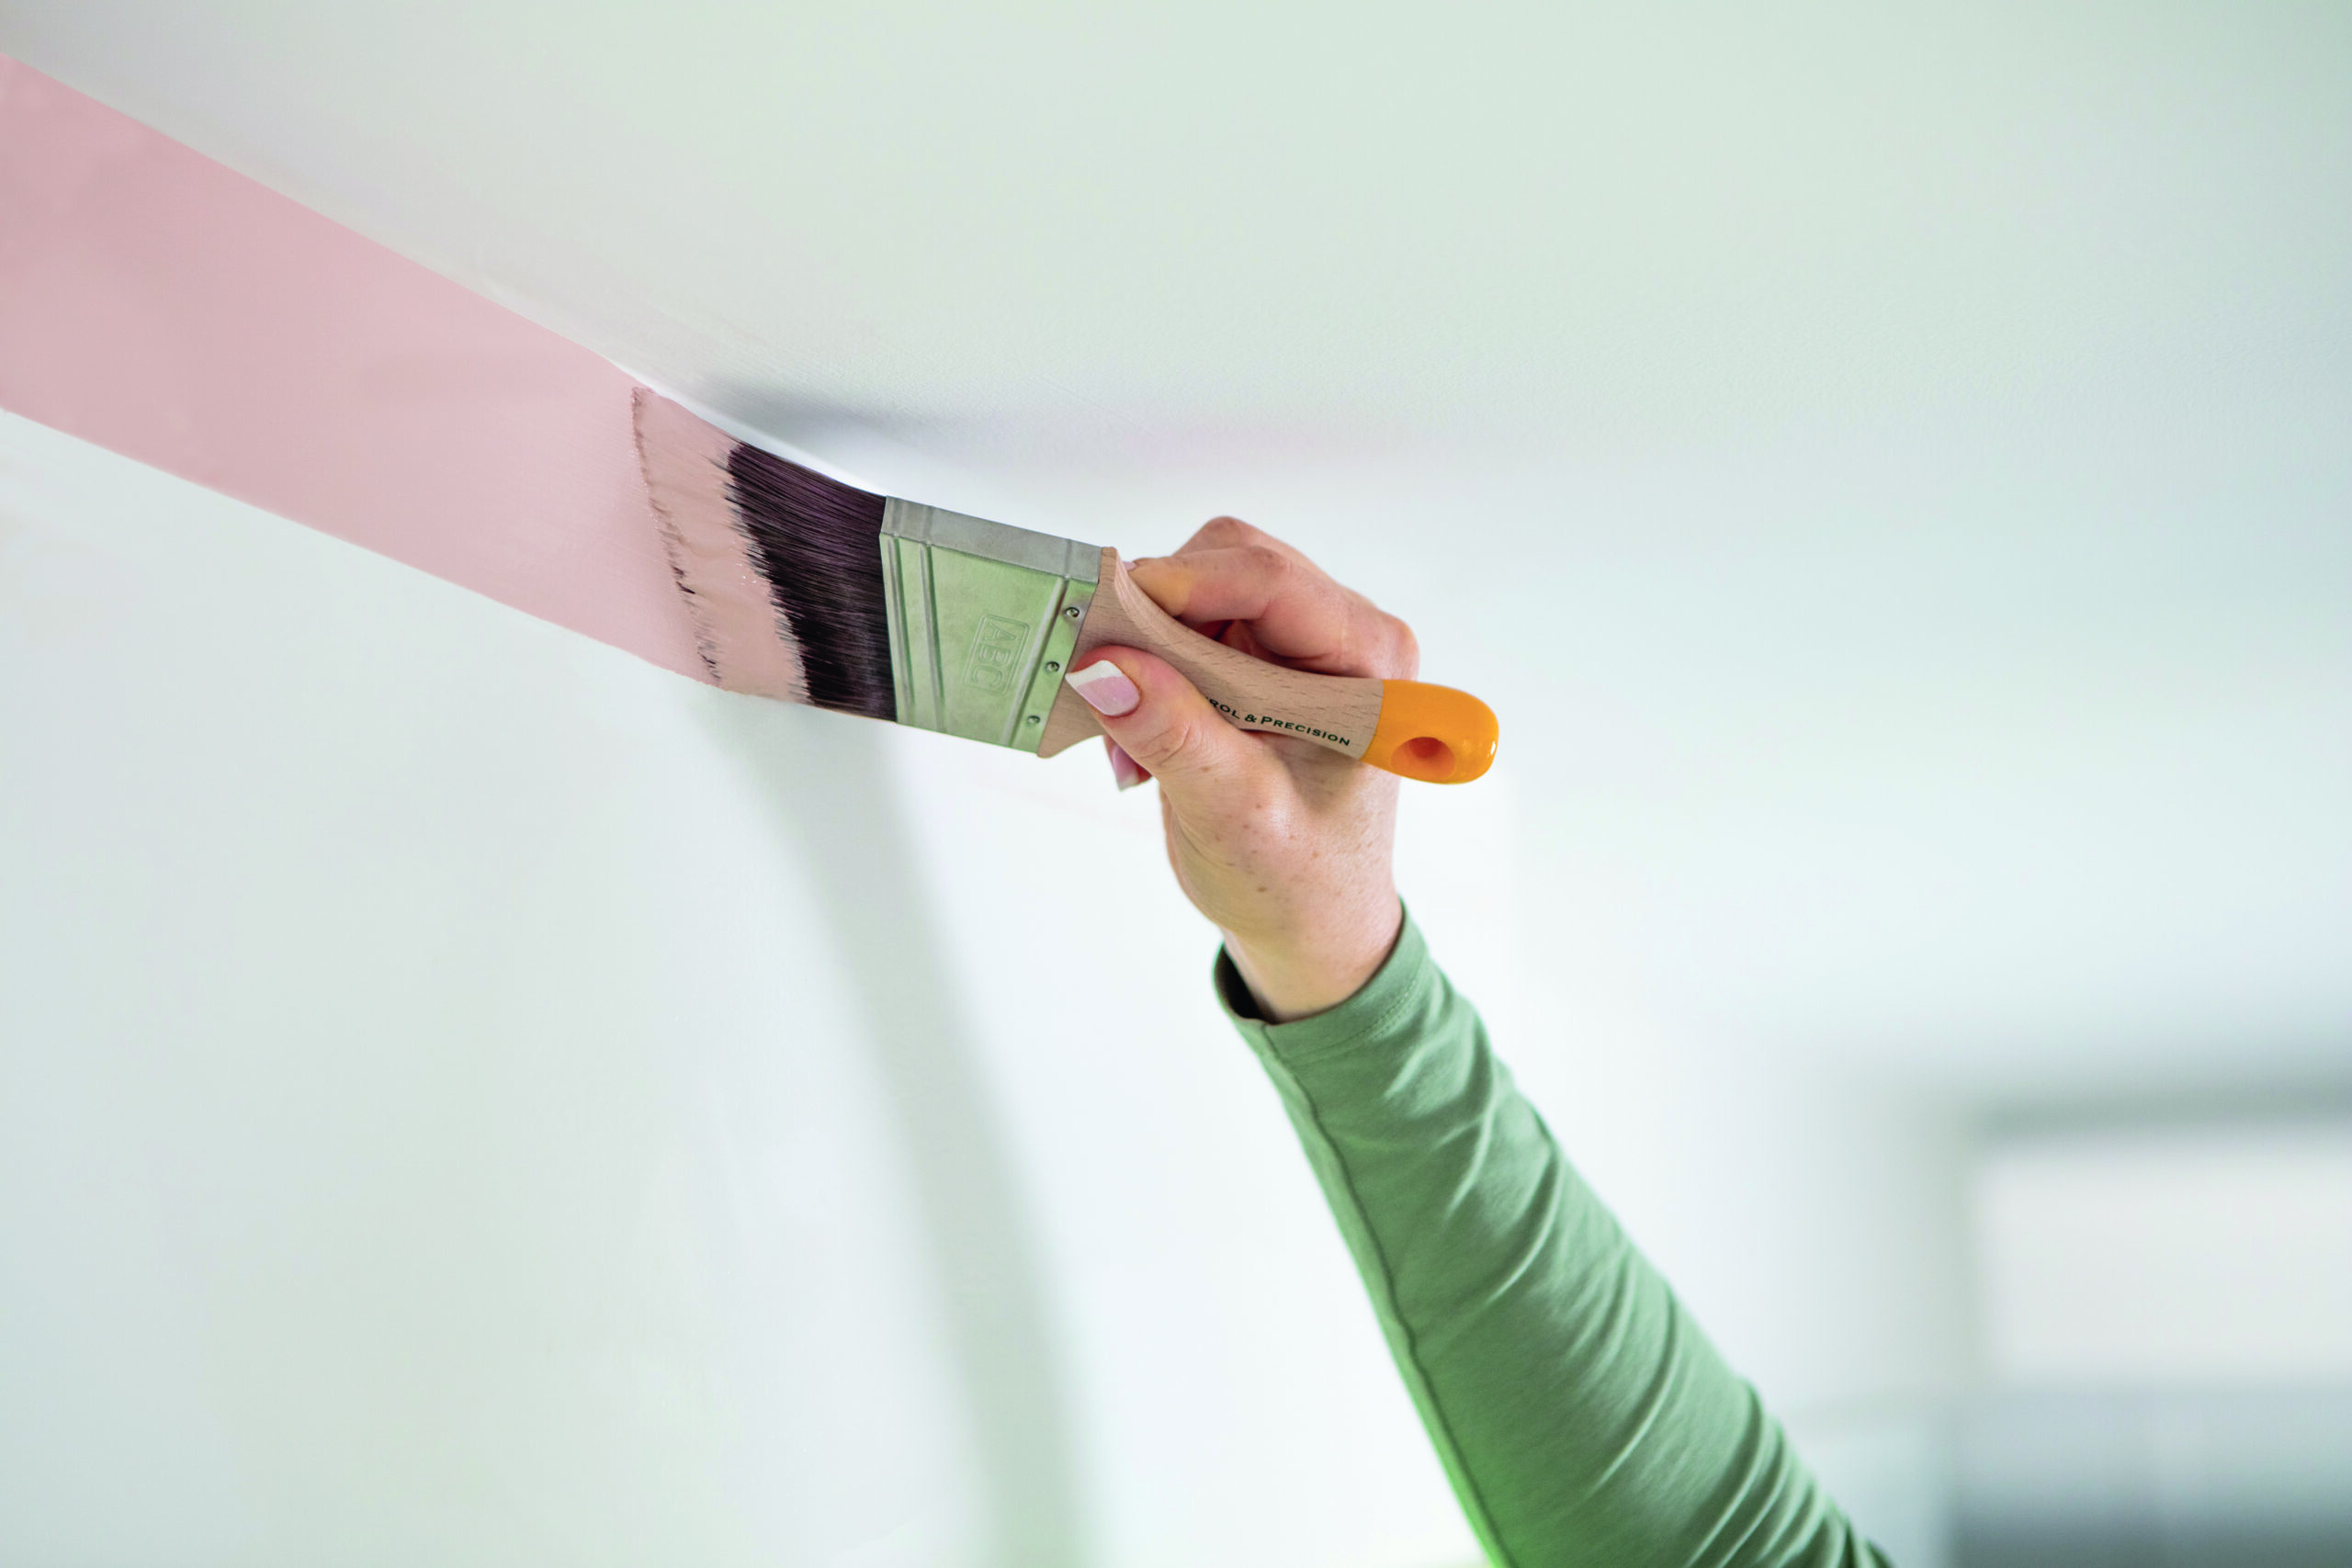 Painting interiors: everything you need to know about preparation and application to get started